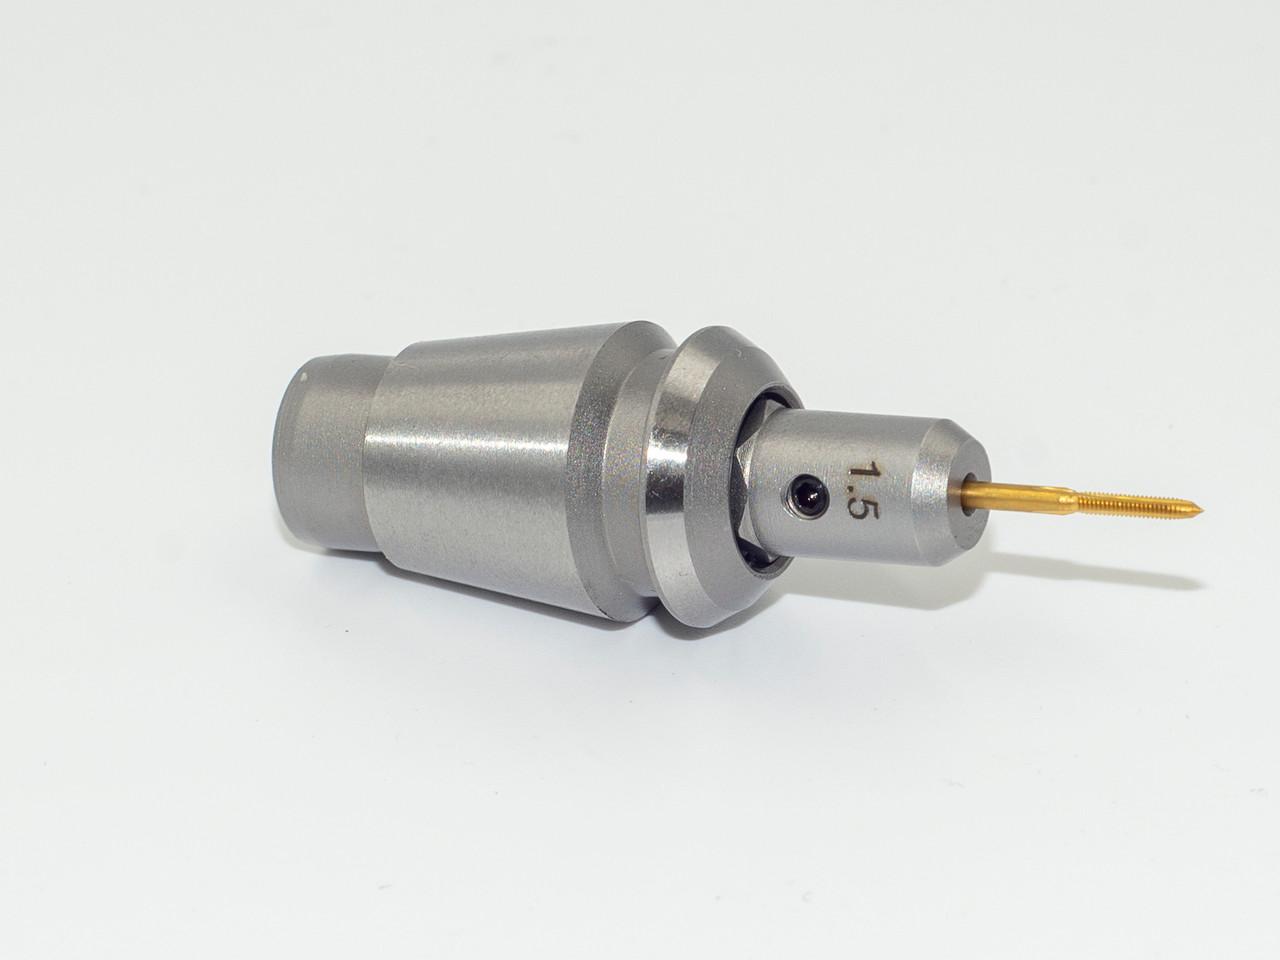 This Tapping  collet is for Taps with a 1.50m shank diameter.  Tapping collets, fit ER-16 collet holders,  Select the collet that fits the shank of your tap.  These spring loaded collets fits shank sizes 1.0mm, 1.5mm and 2.0mm.